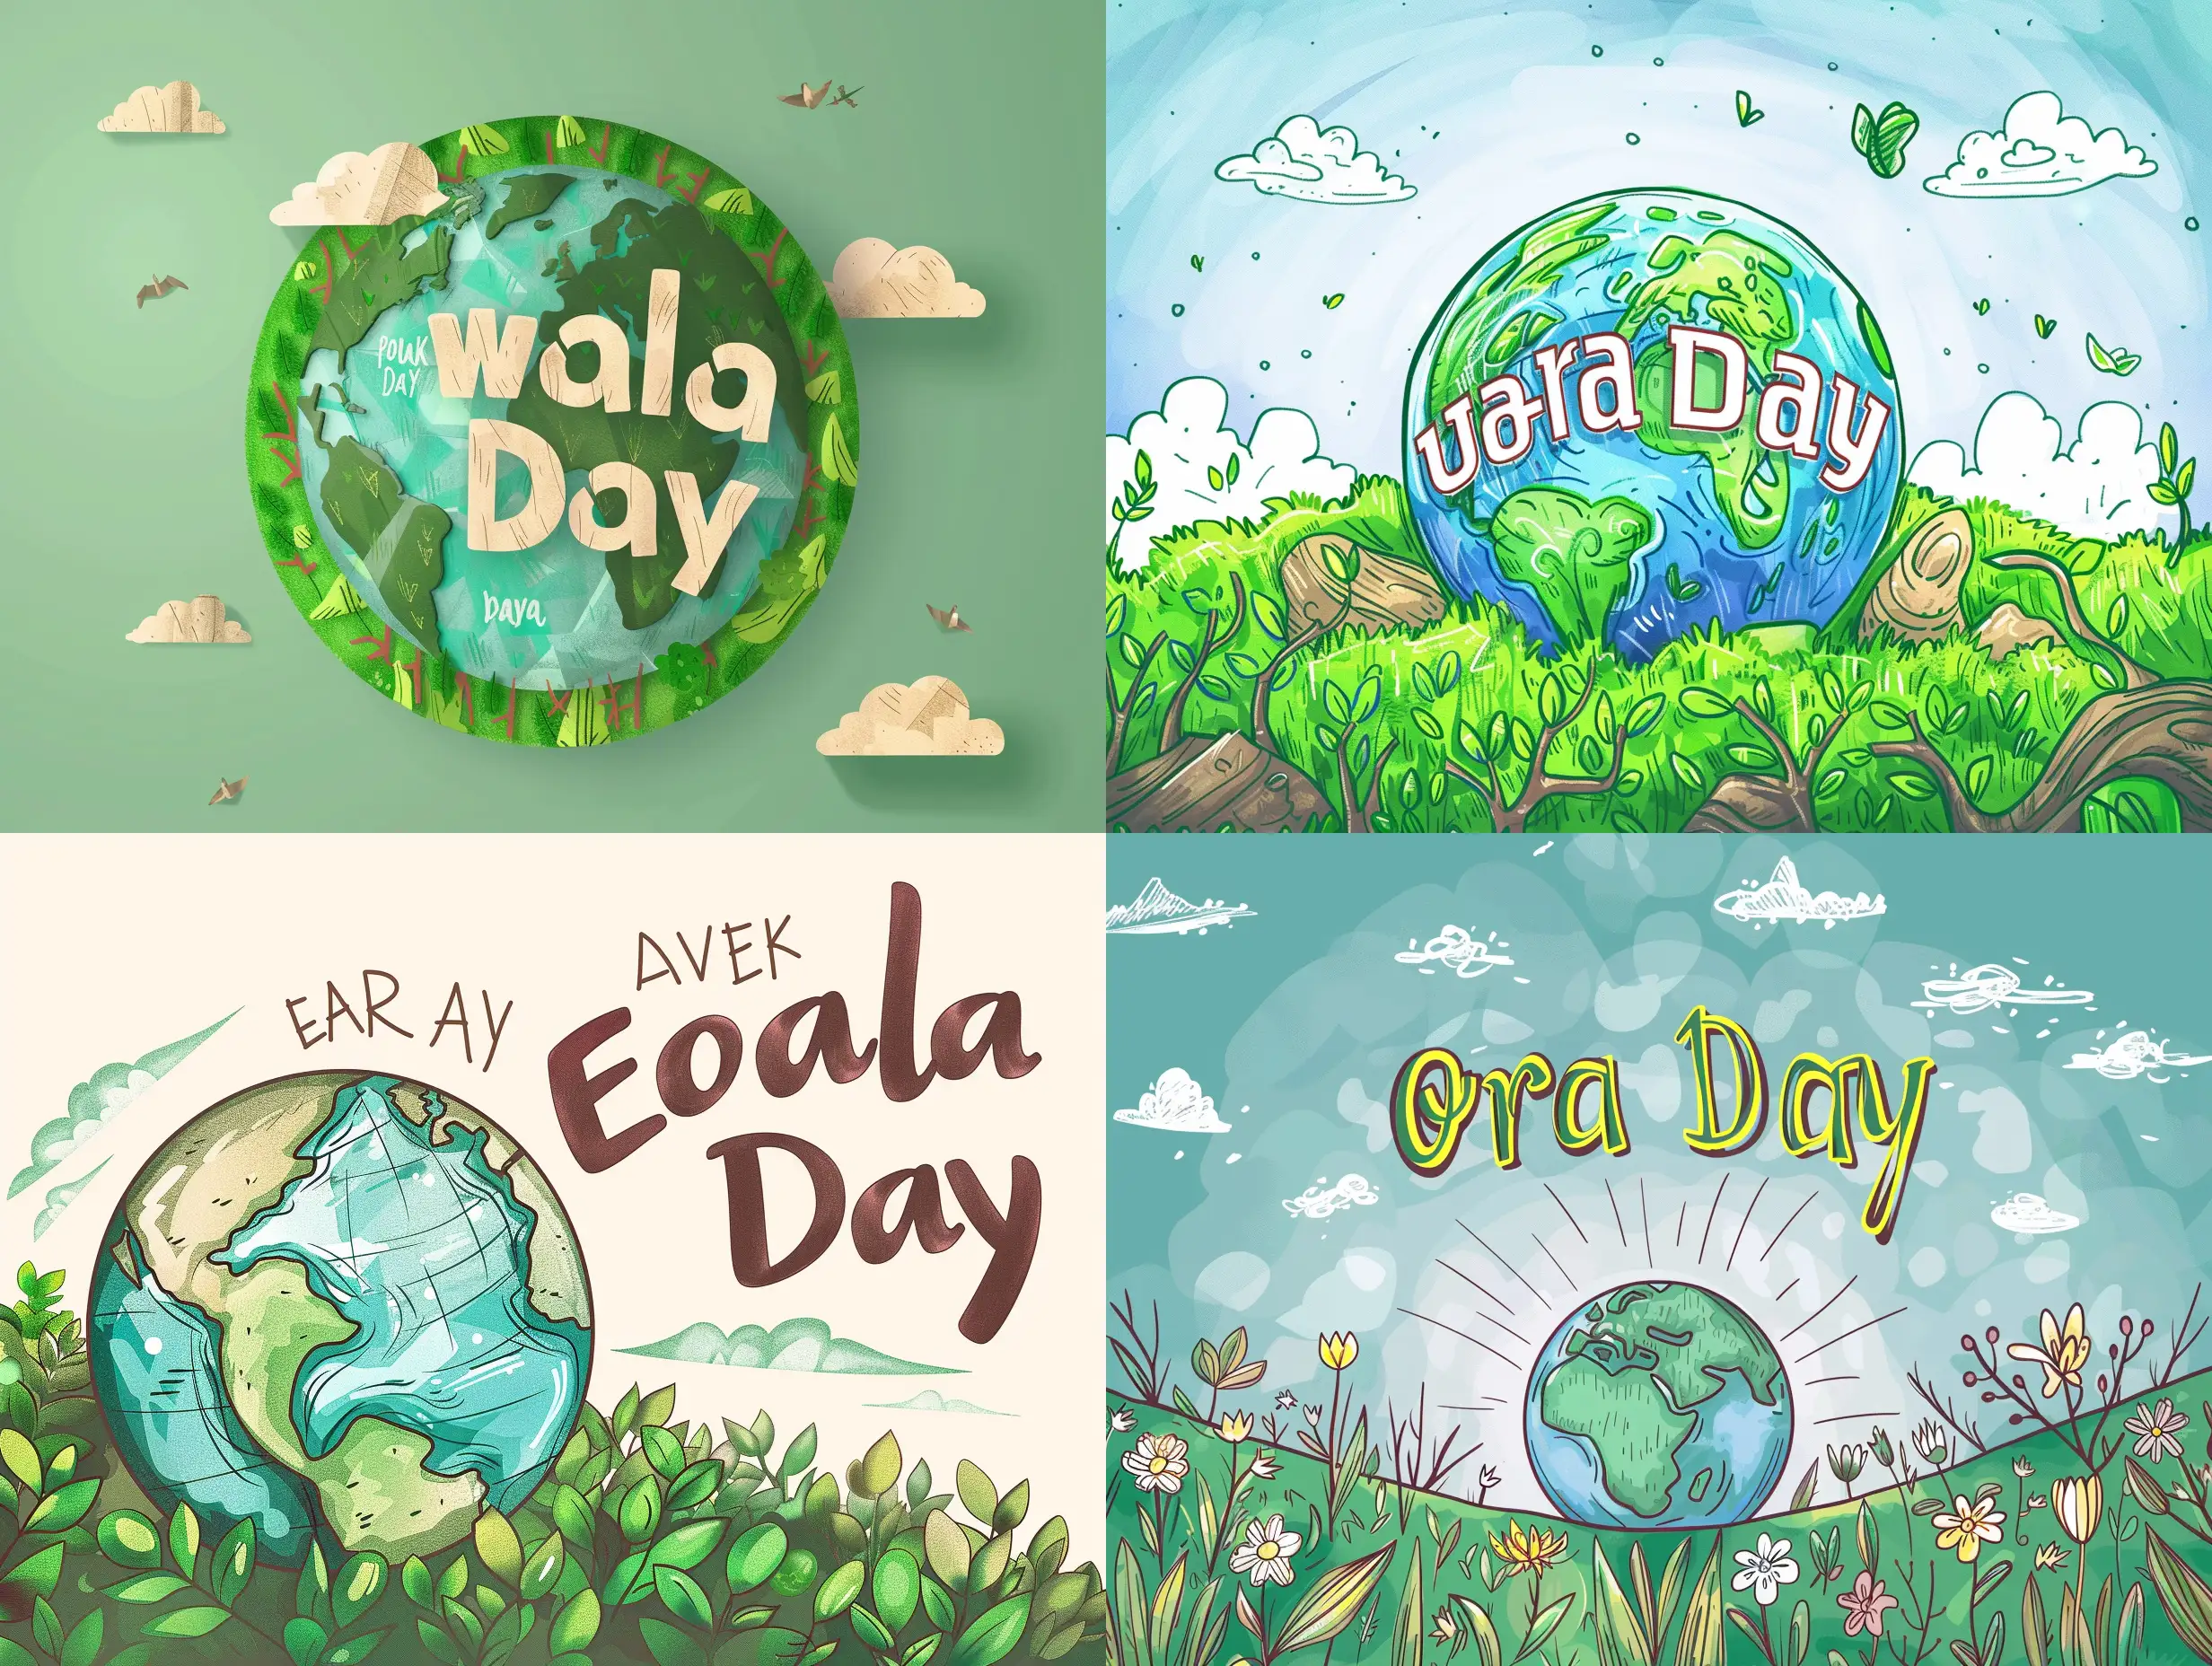 an illustration that celebrates earth day with text: Earth Day